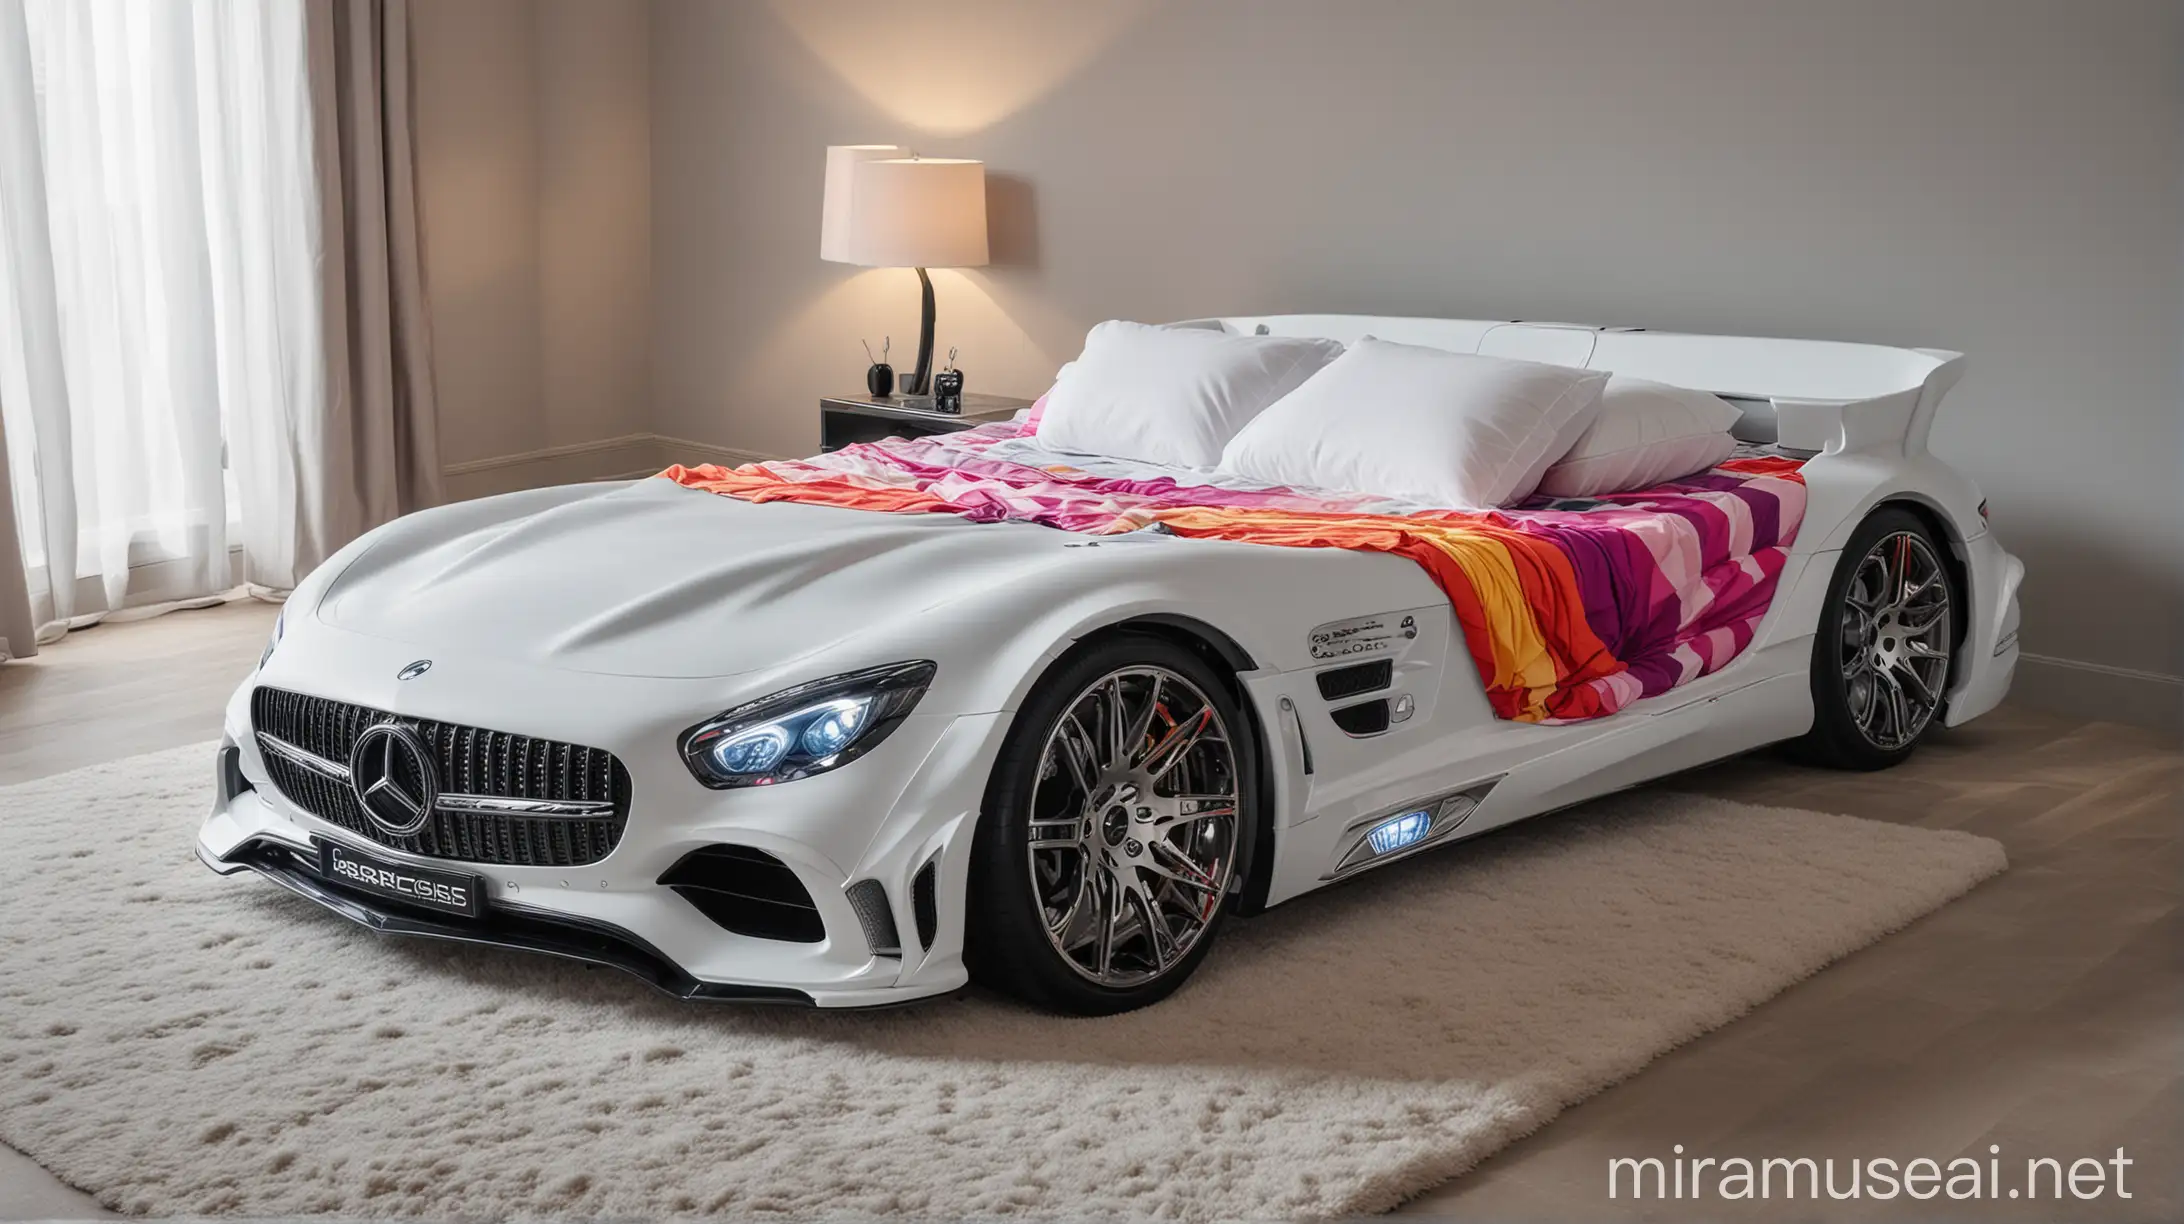 Luxurious Double Bed Shaped like a Mercedes AMG Car with Brightly Colored Bedding